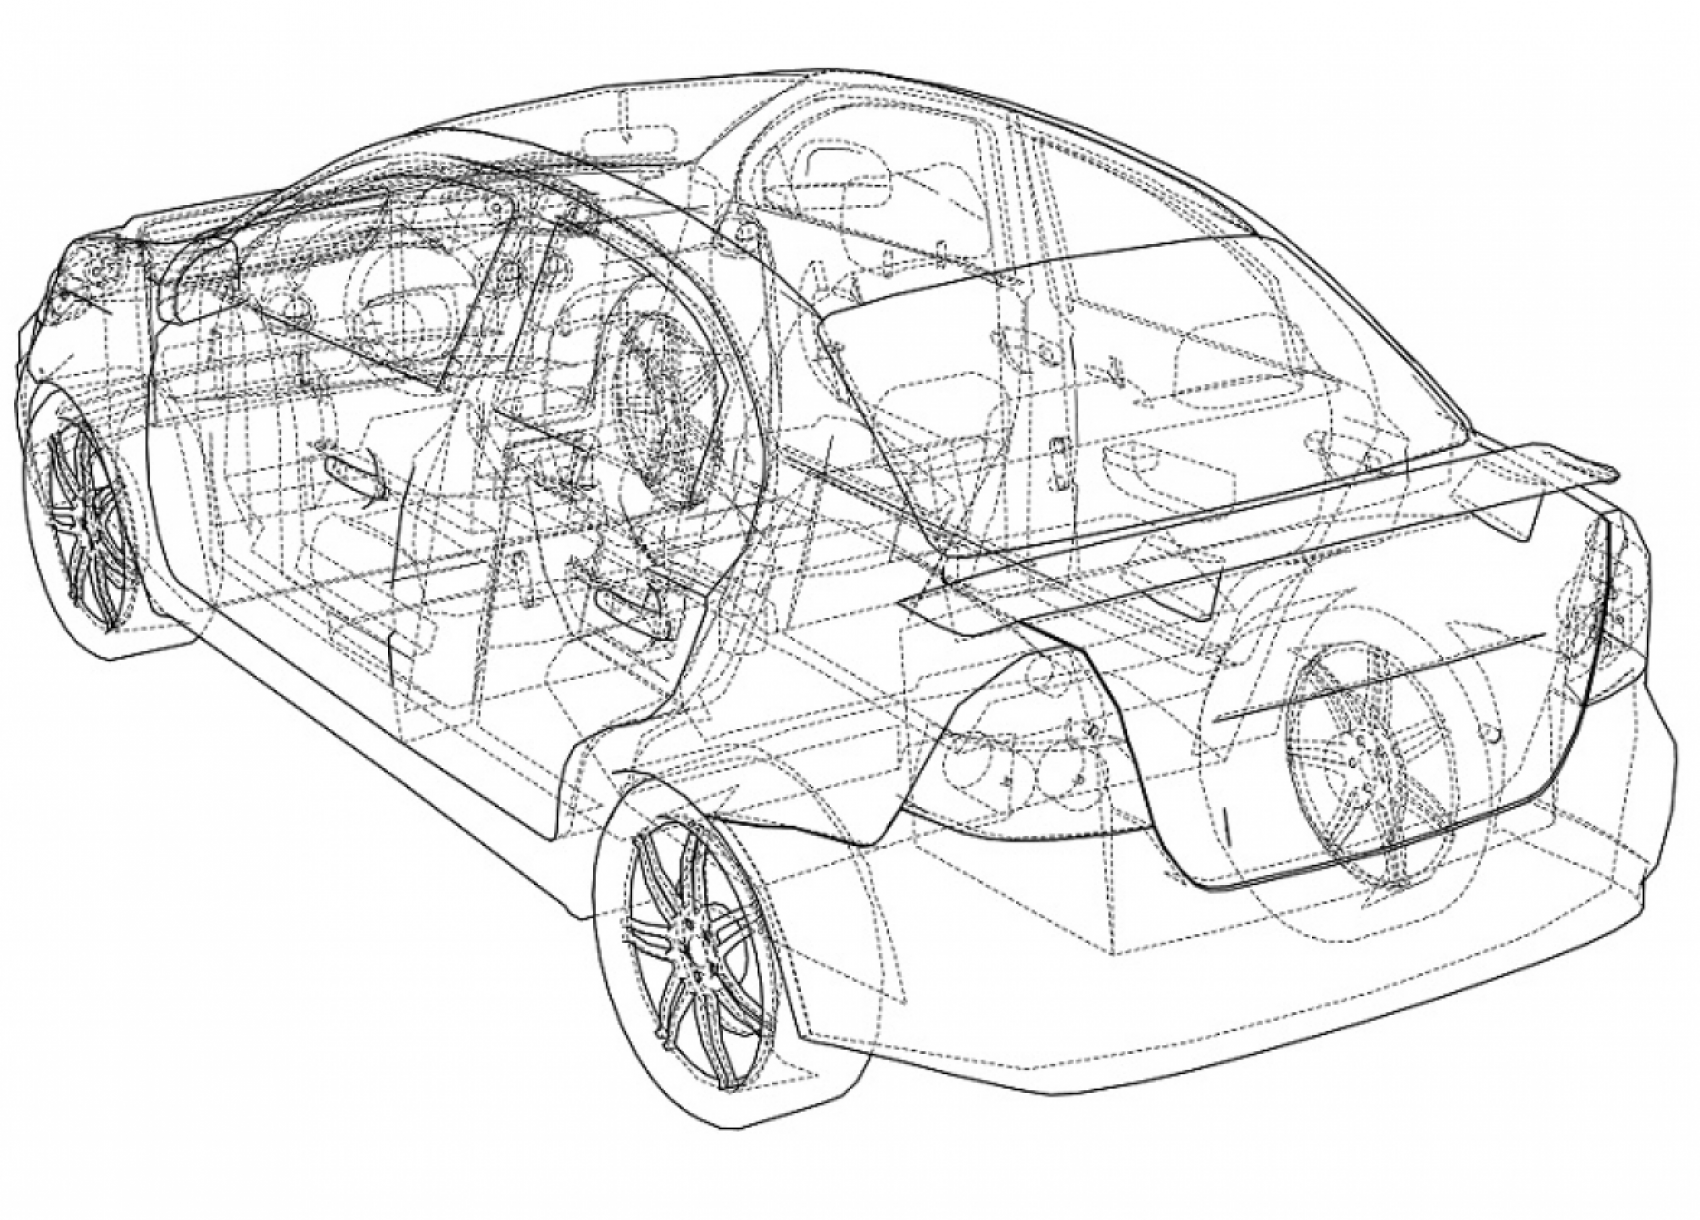 Technical drawing of car.